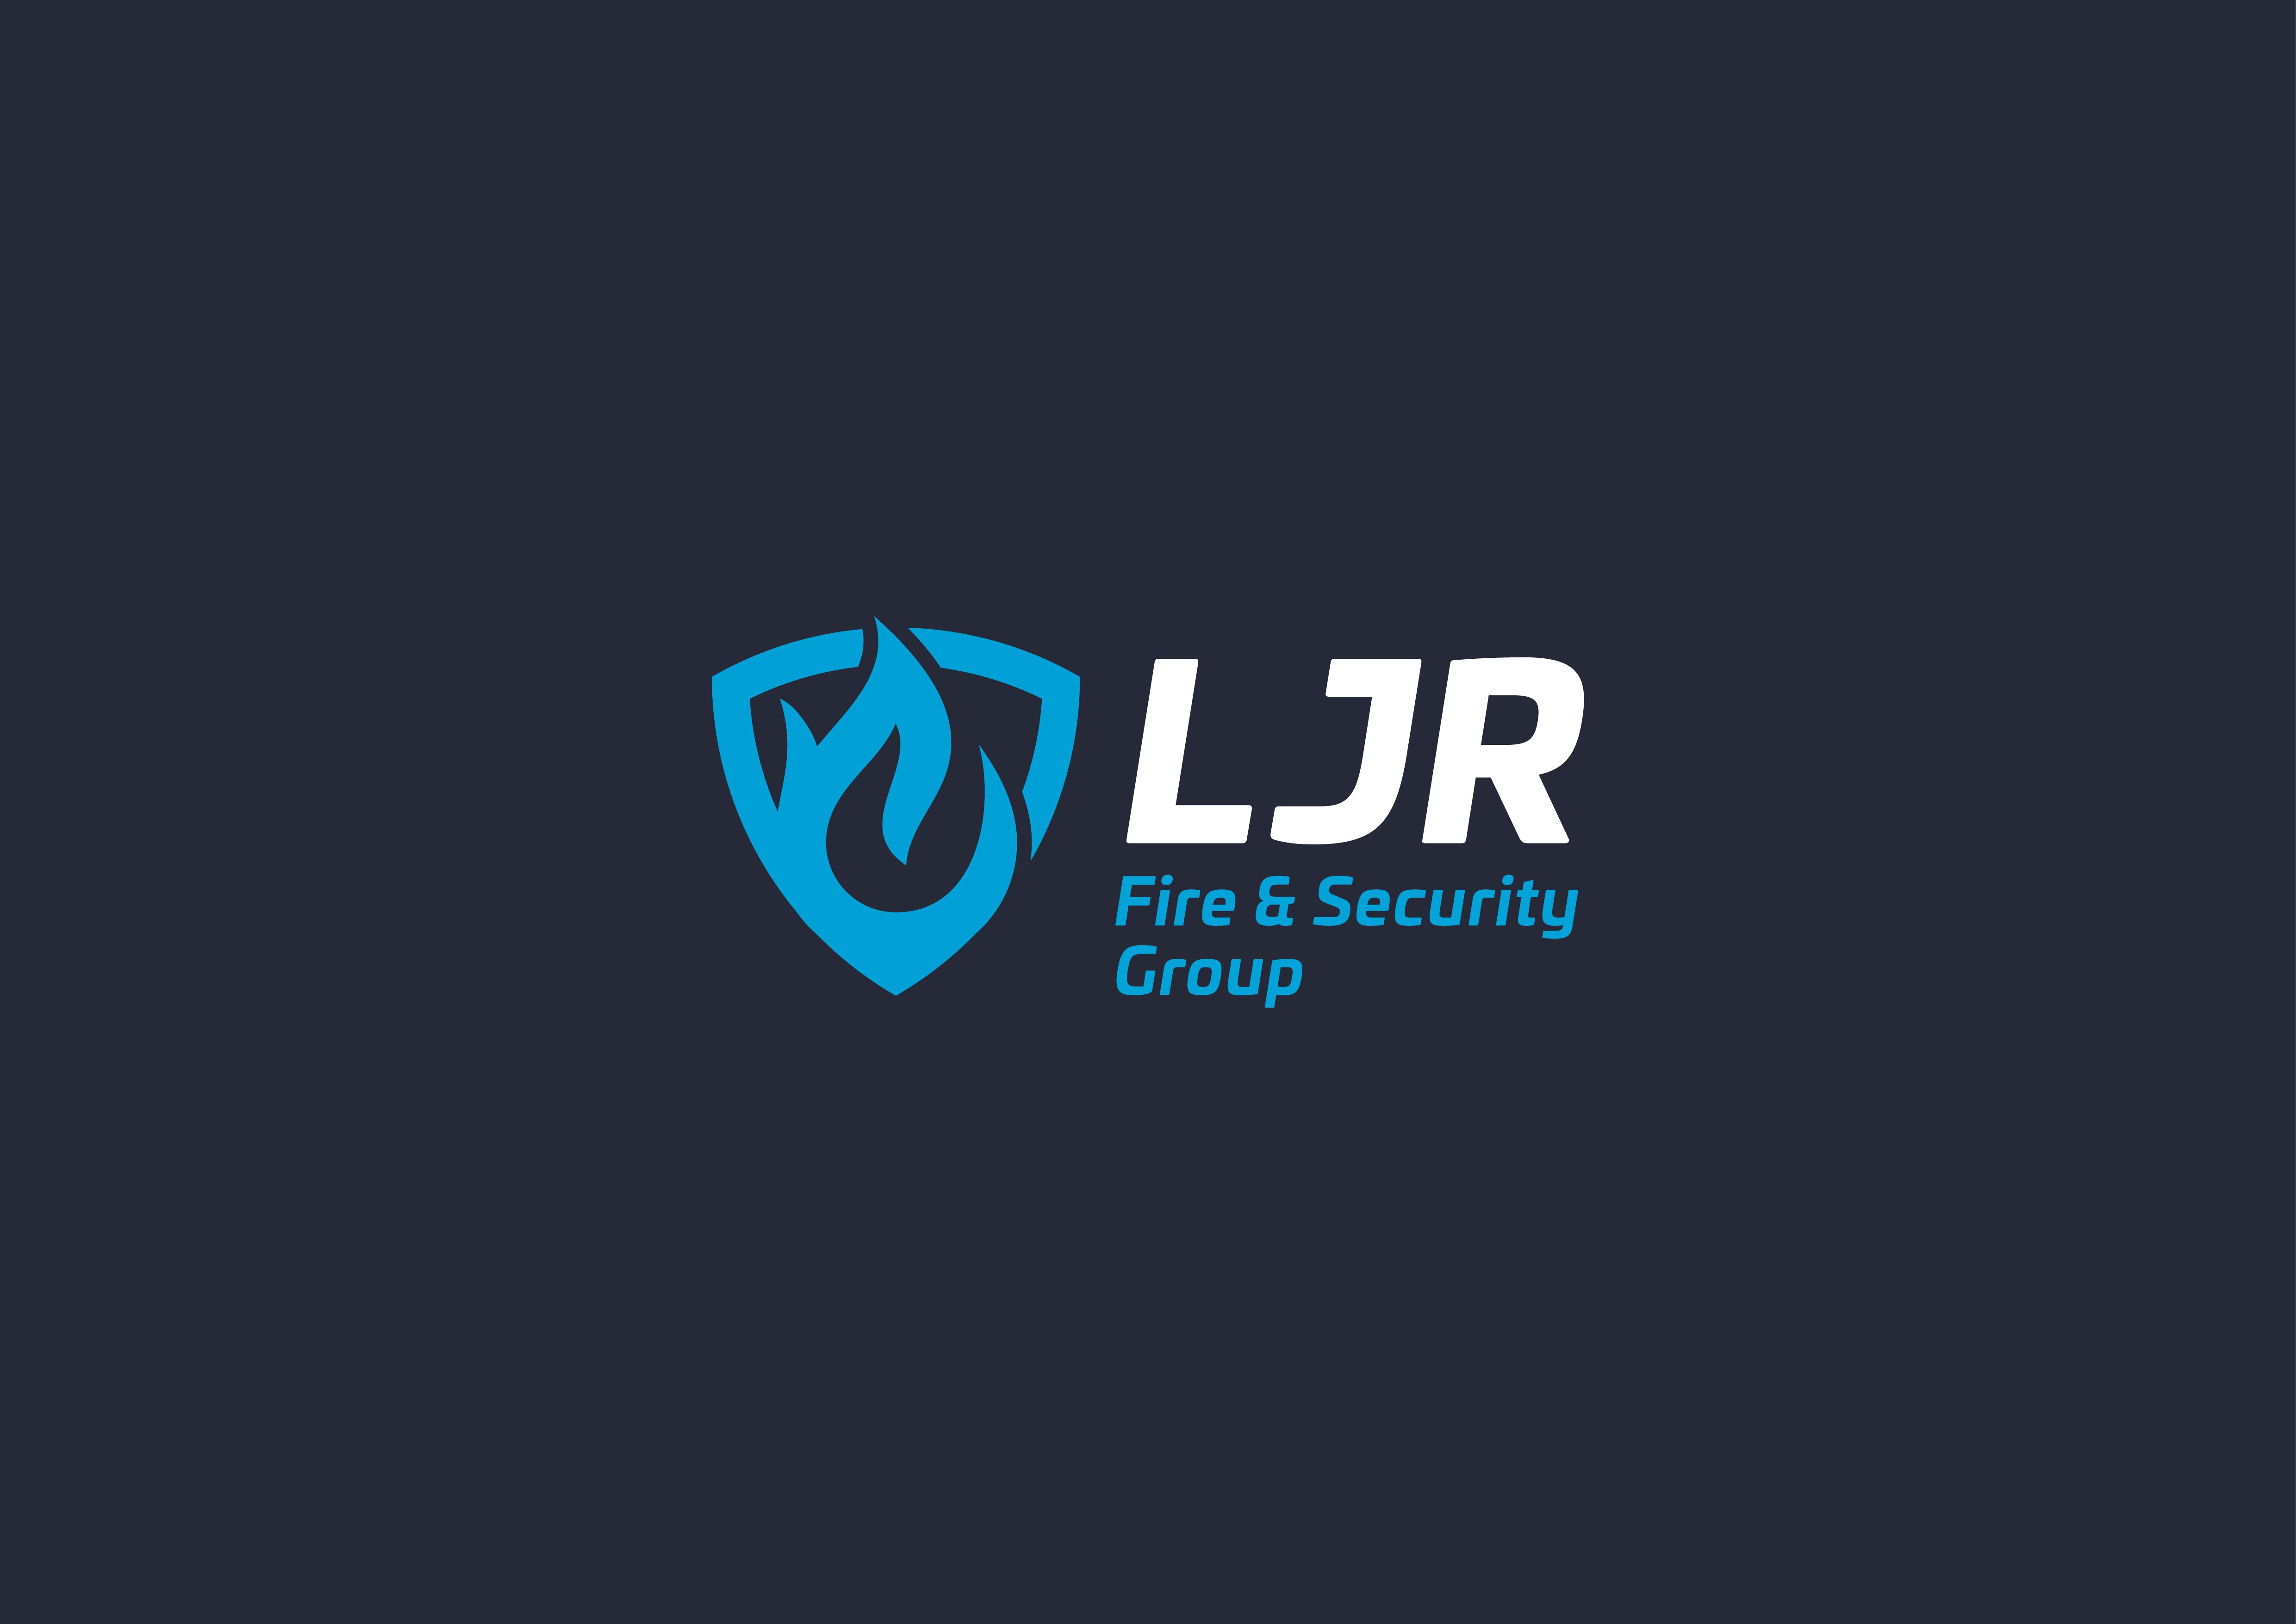 LJR Fire & Security Group